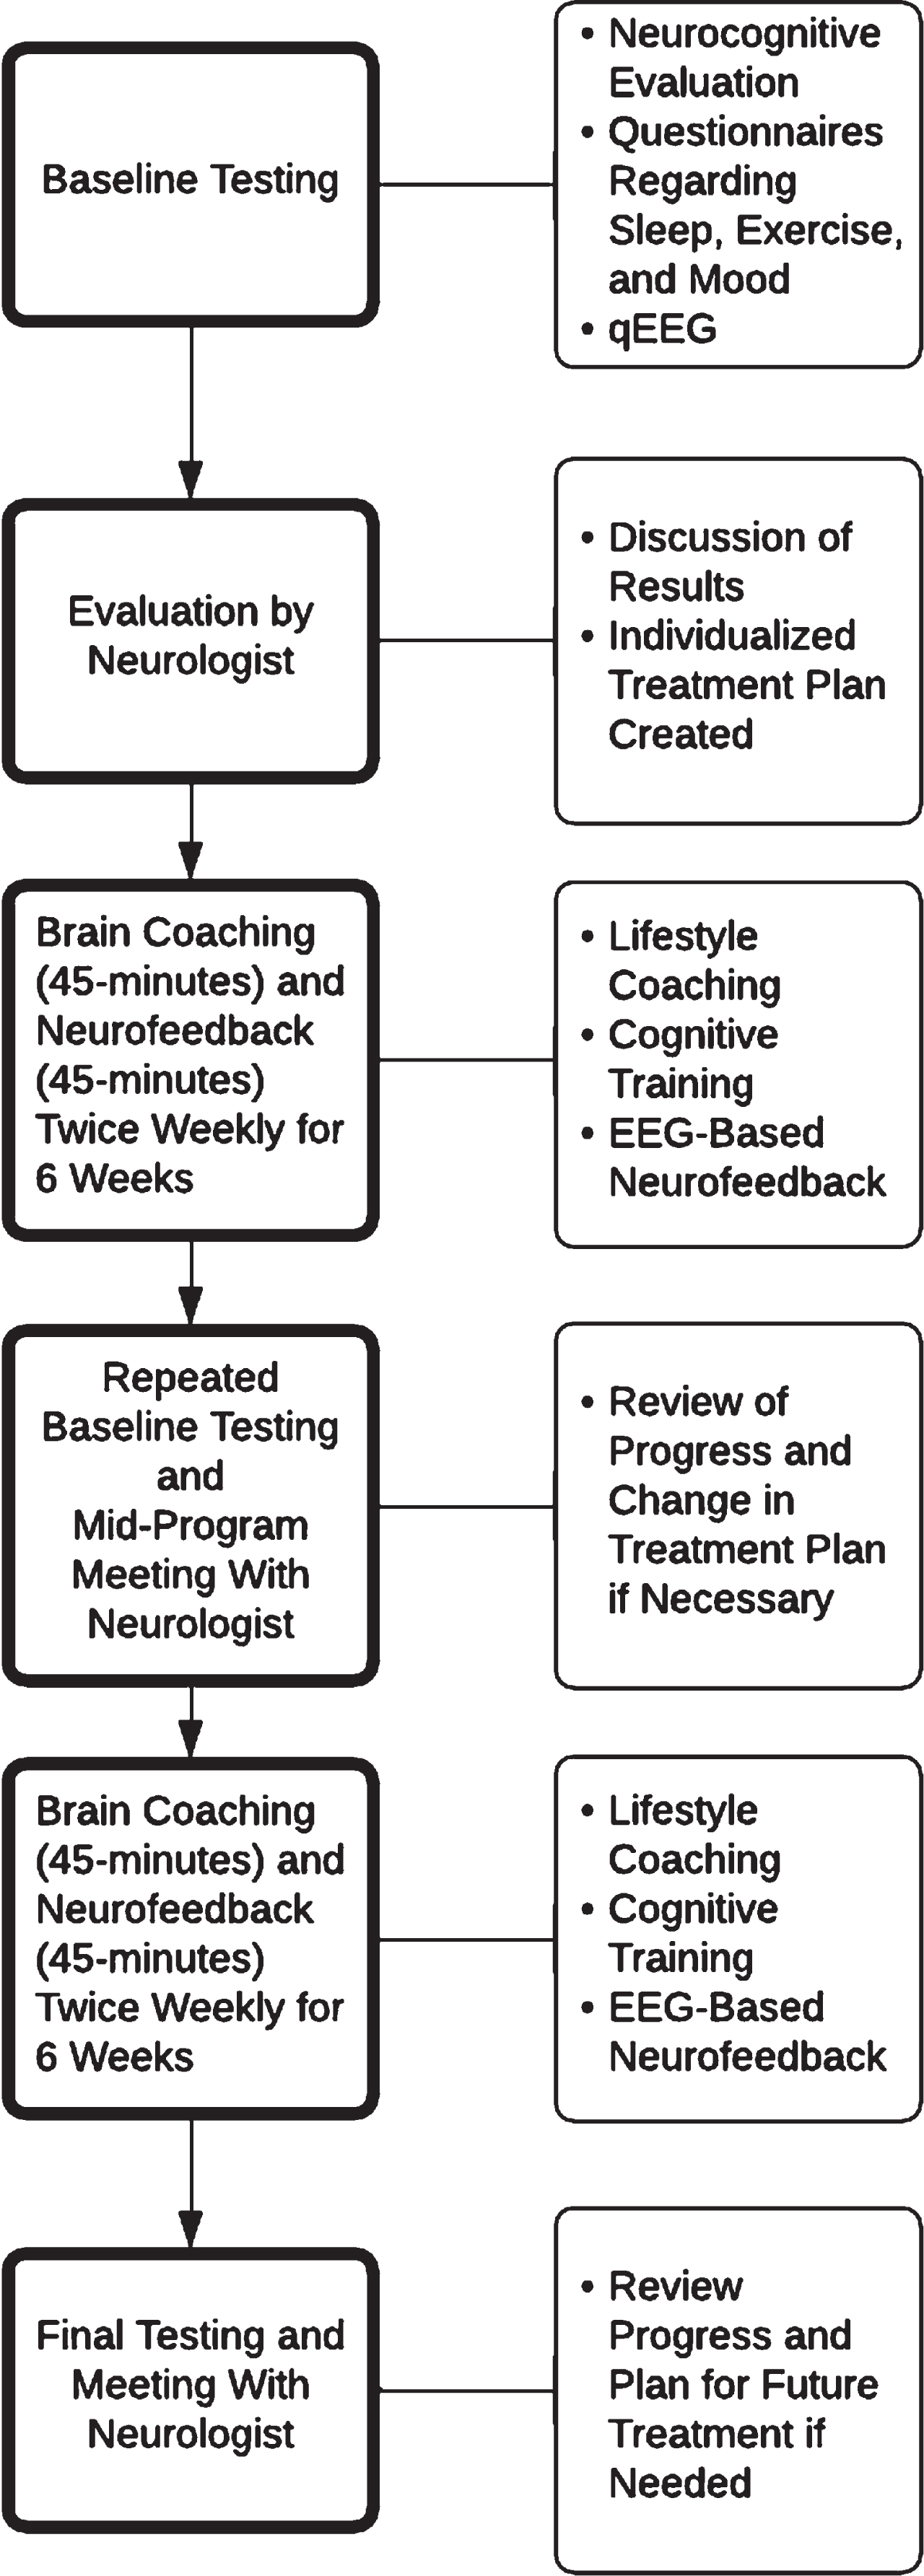 Flowchart showing the sequence of steps for patients who complete the NeuroGrow Brain Fitness Program.